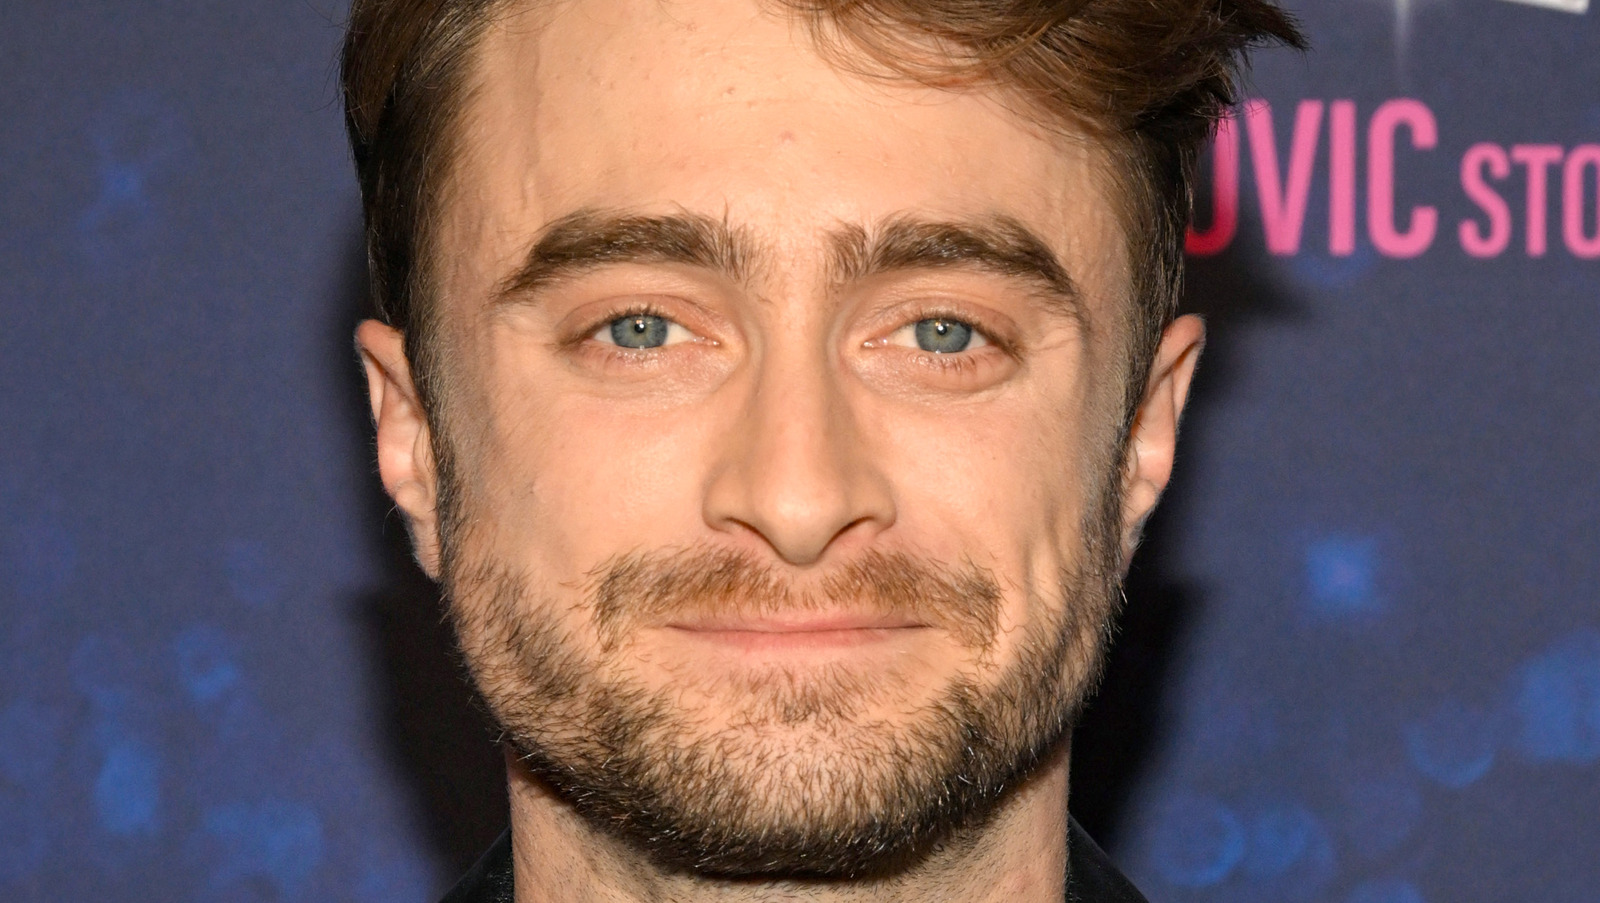 Many Fans Share Their Thoughts on Daniel Radcliffe’s Suspected Twitter Suspension